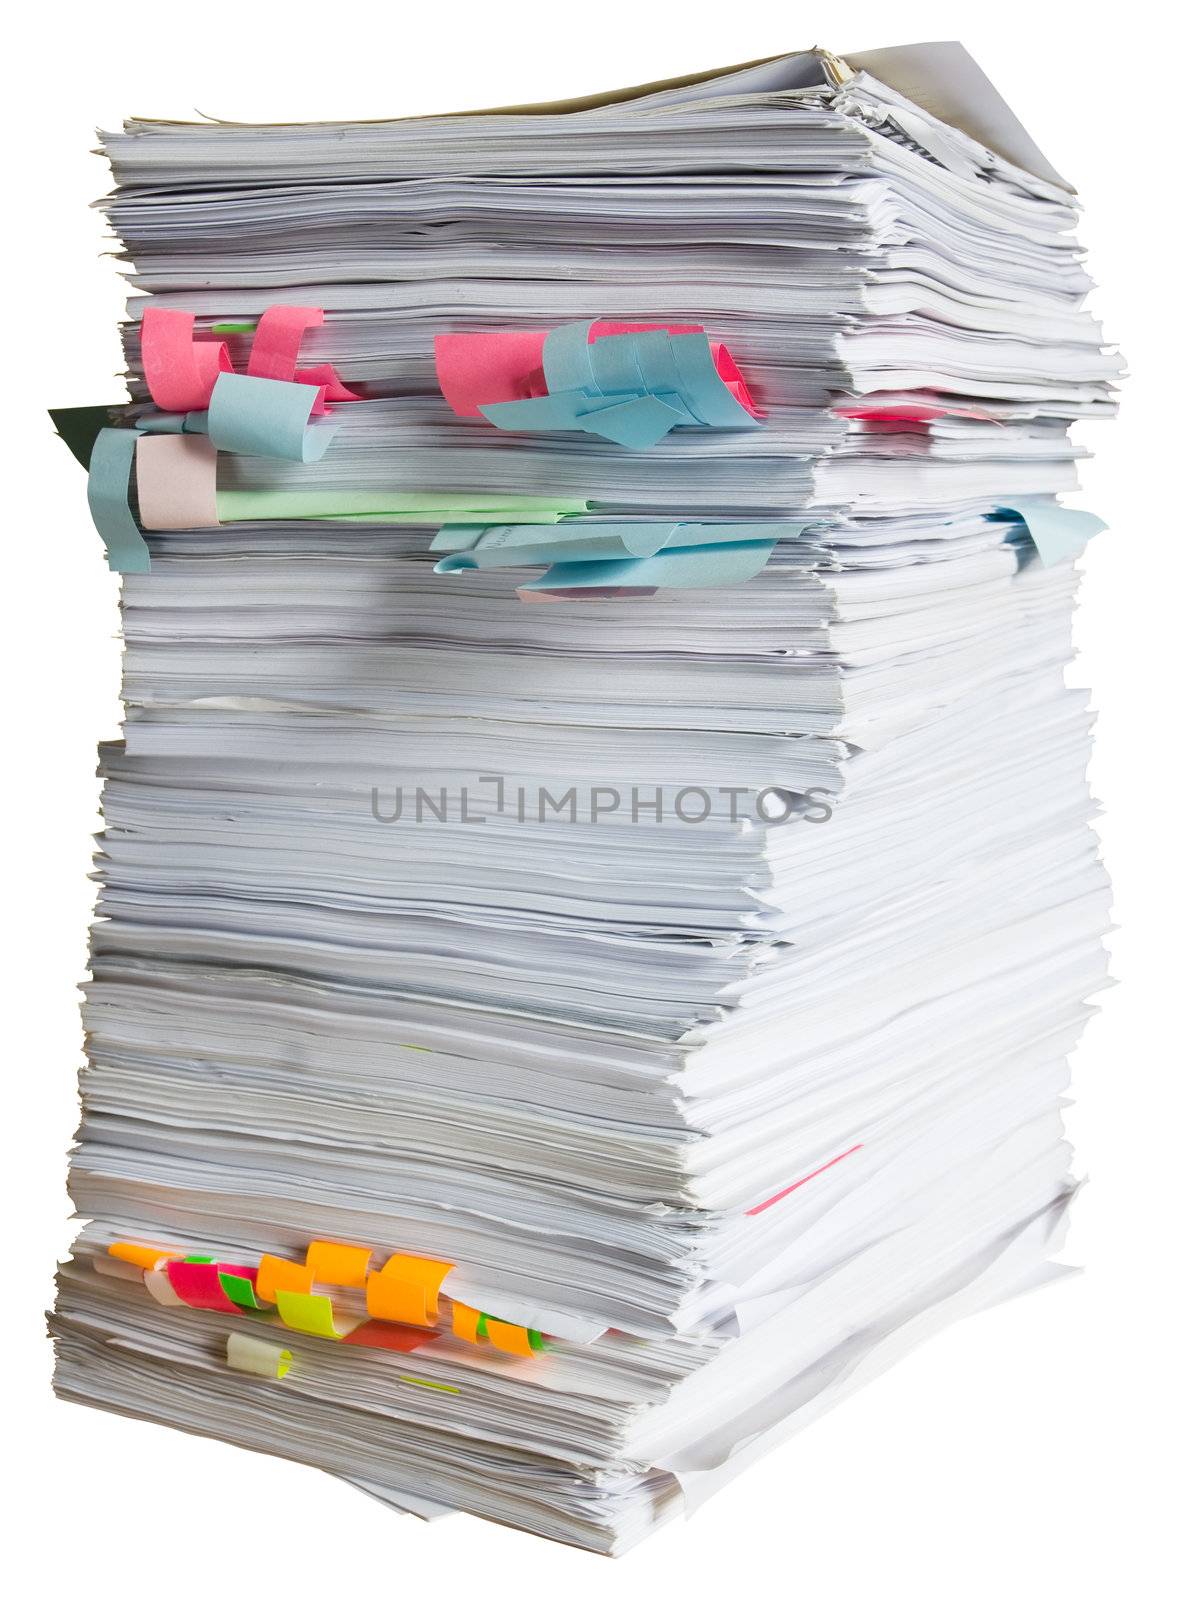 Large pile of waste paper isolated on white background with clipping path